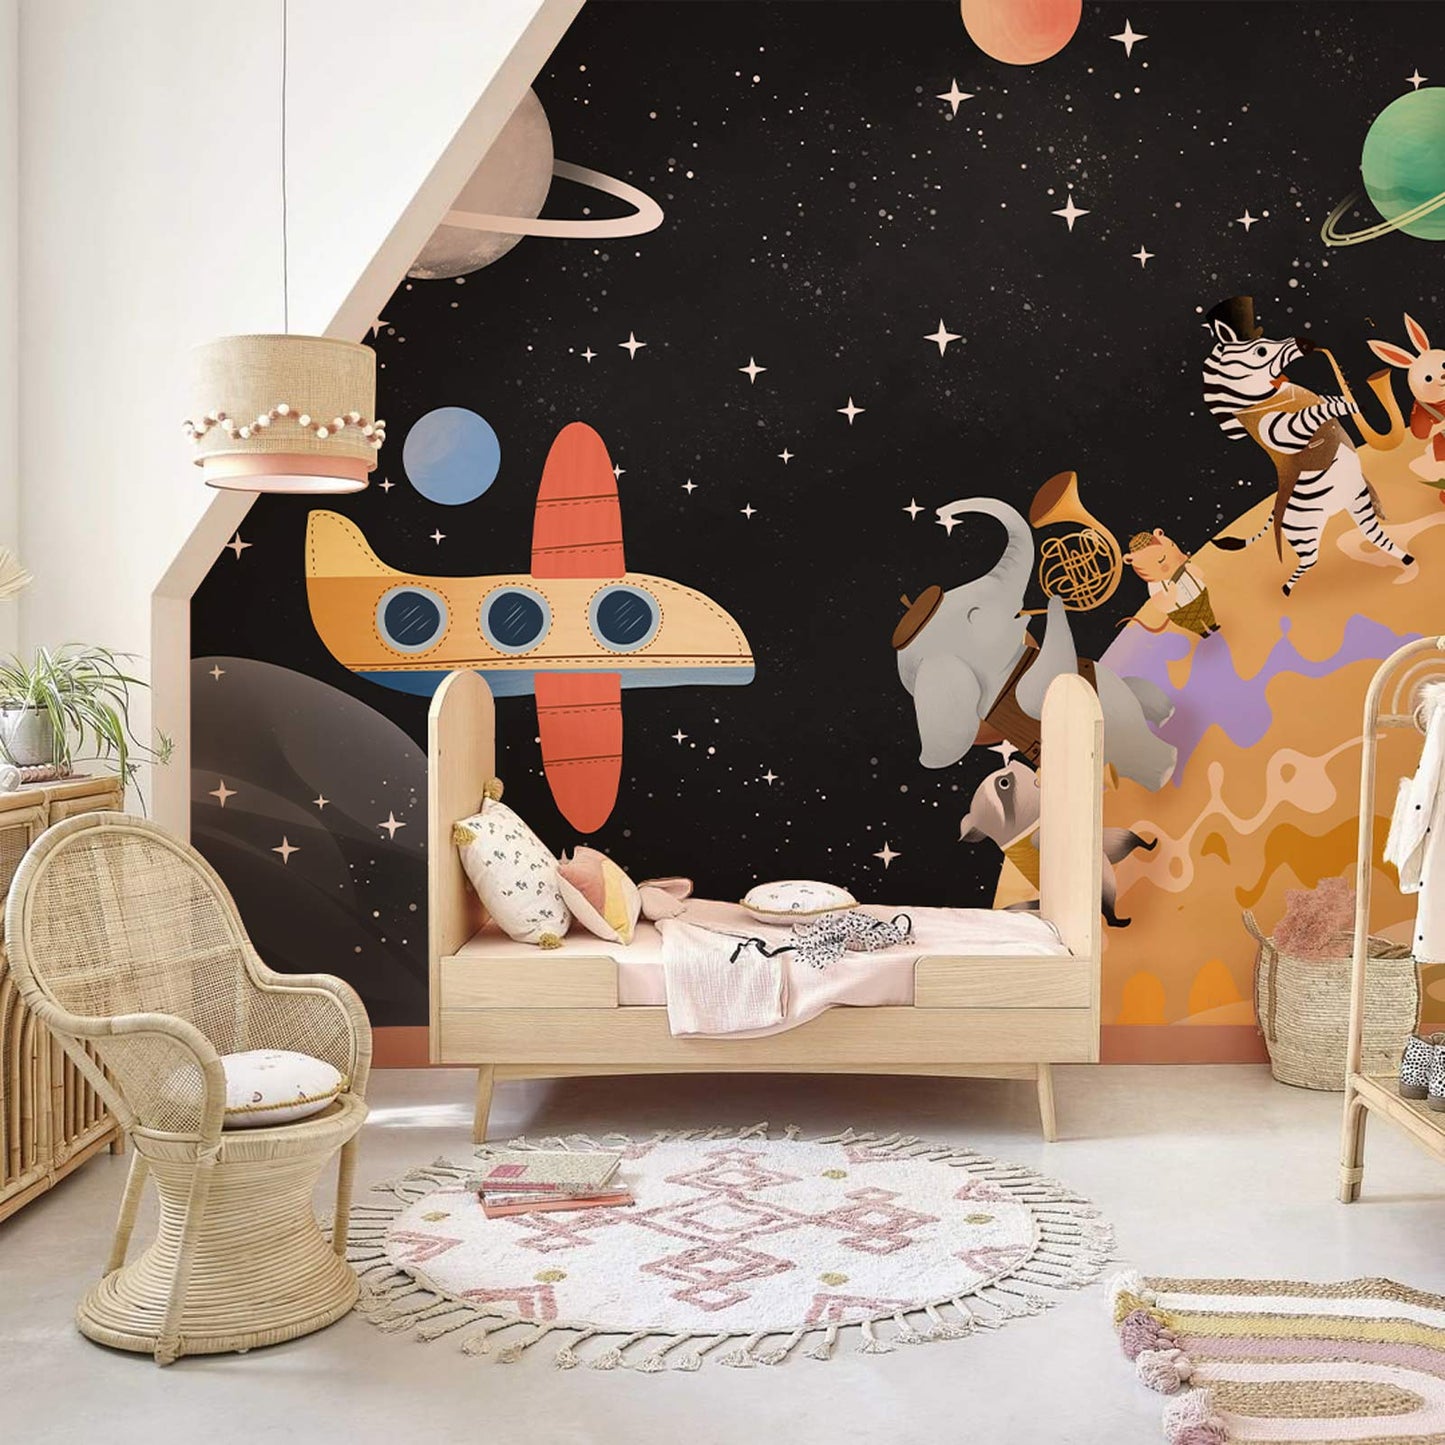 Wallpaper Mural of Animals Roaming the Universe Applied to Bedroom